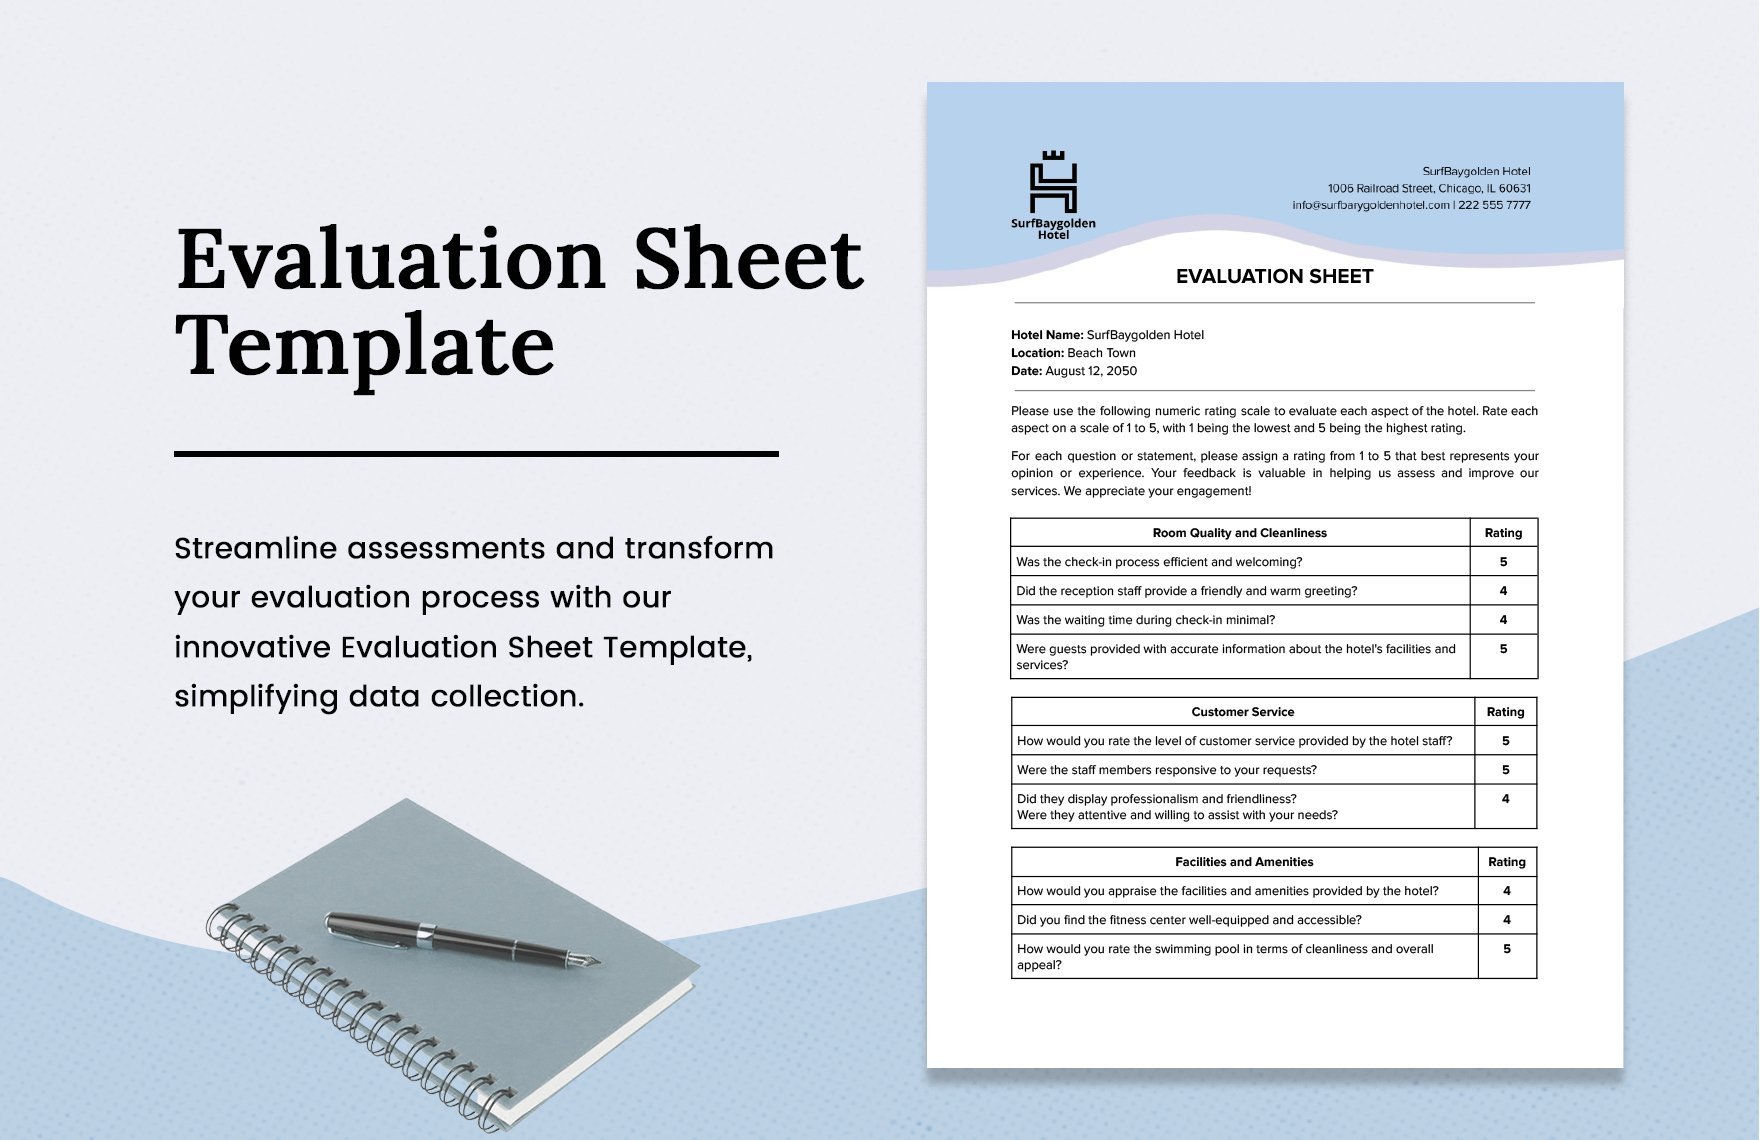 Evaluation Sheet Template in Word, Google Docs, PDF, Apple Pages